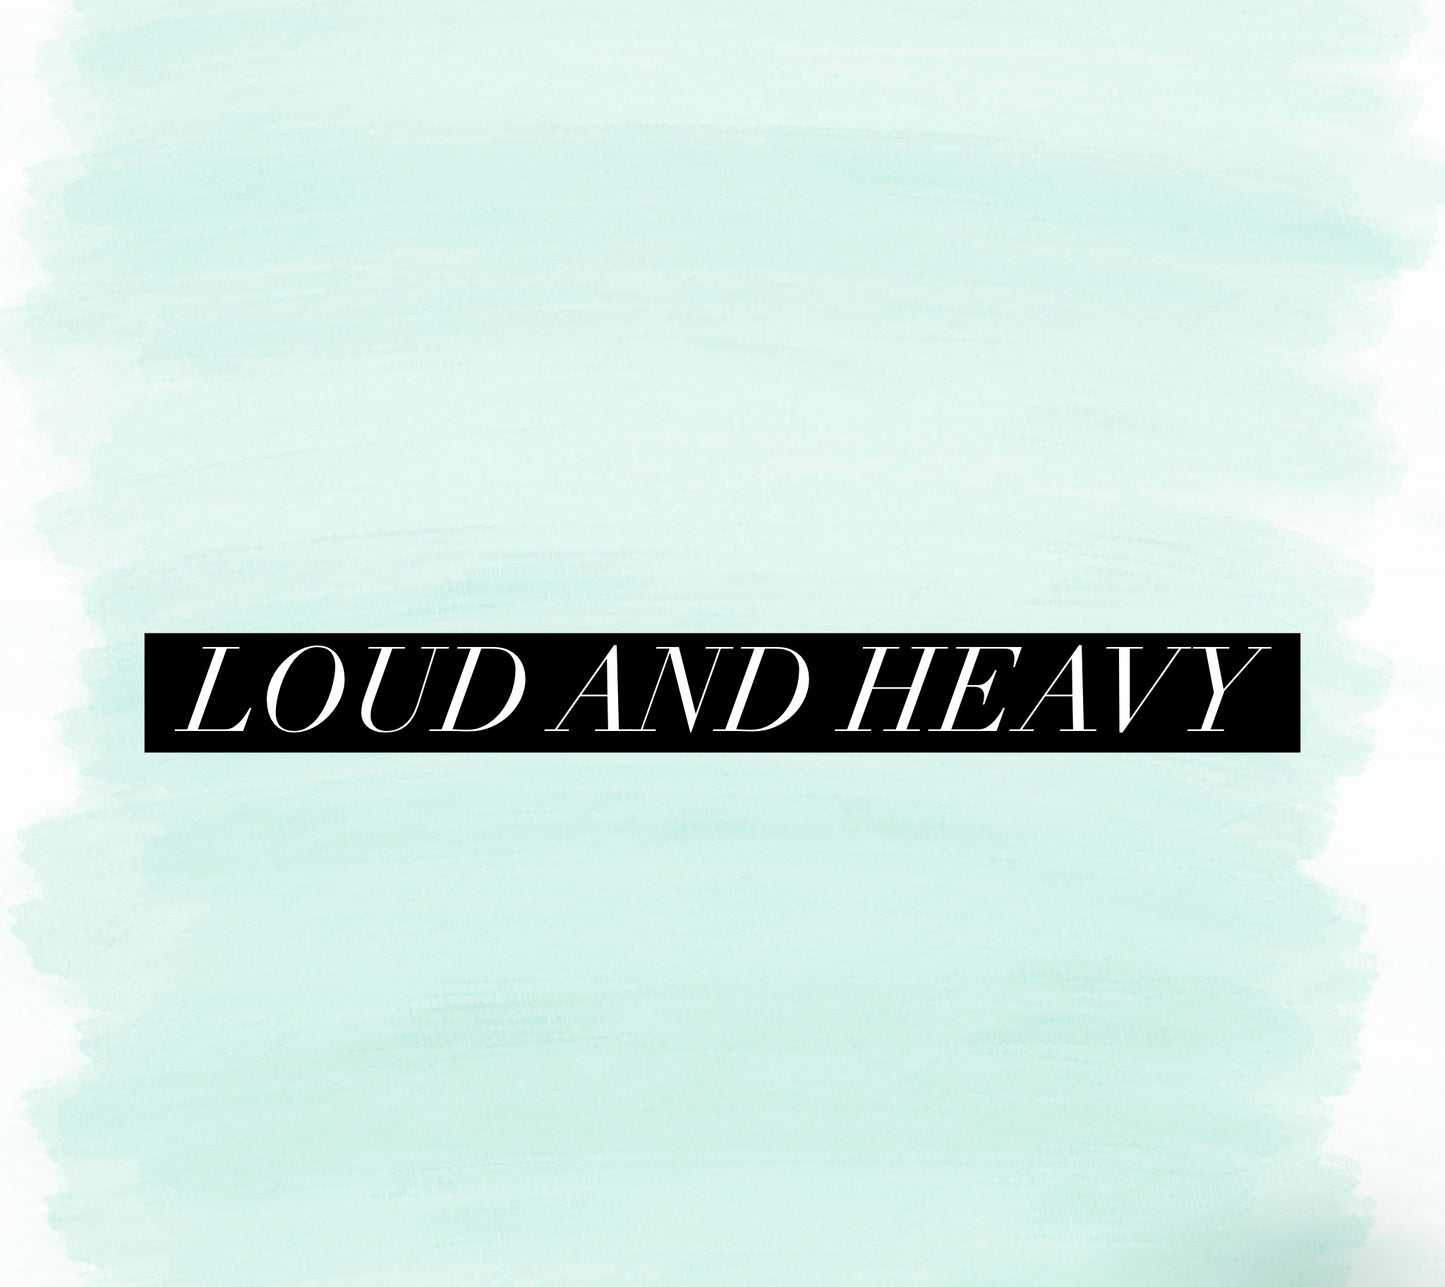 Loud and Heavy (Special Order)